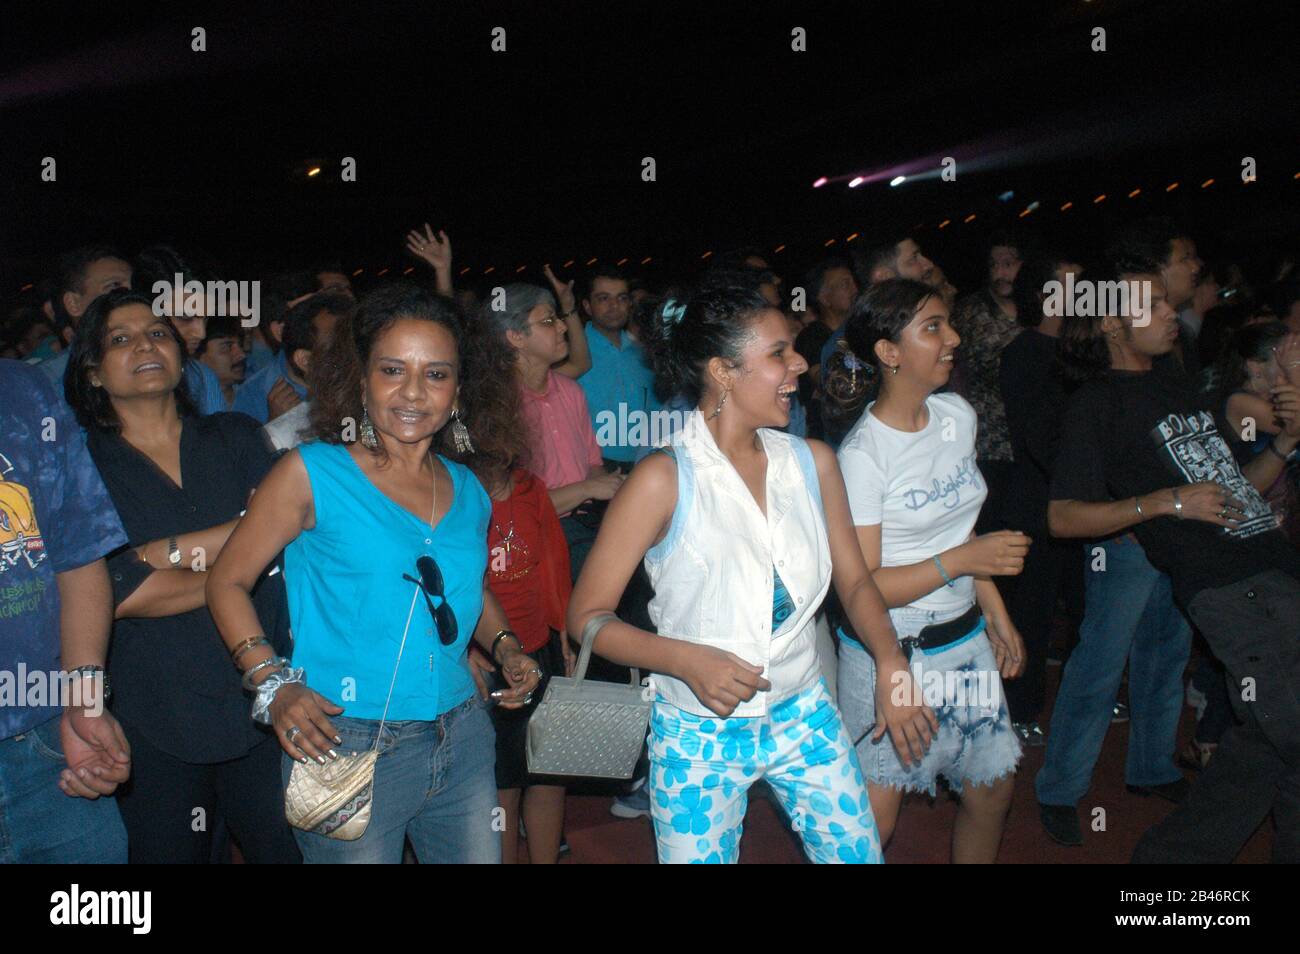 Crowd cheering English musicians singers Mick Jagger and Keith Richards of Rolling Stones at show in bombay mumbai maharashtra india asia Stock Photo